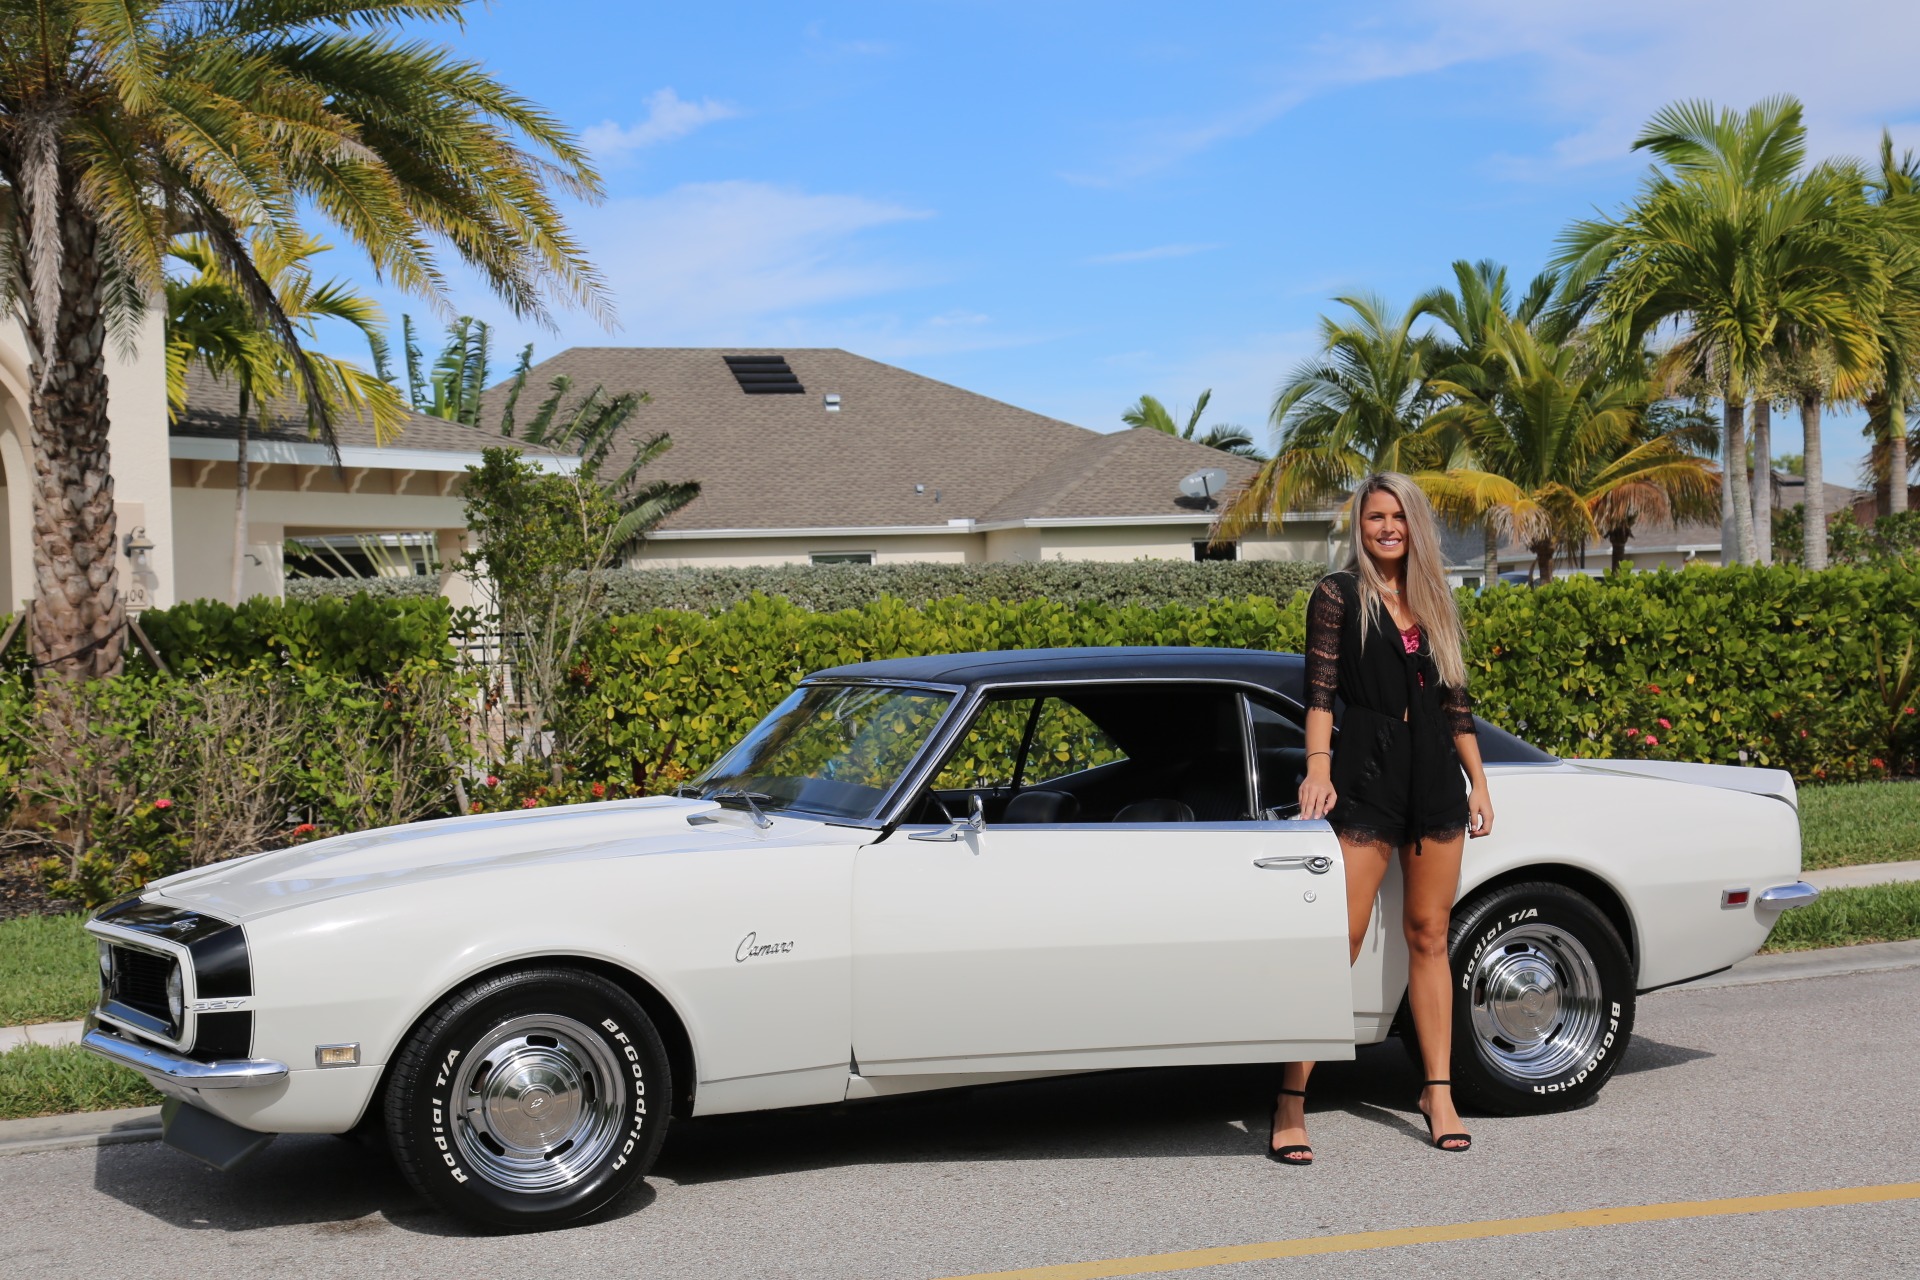 Used 1968 Chevy Camaro 327 V8 Auto # Match for sale Sold at Muscle Cars for Sale Inc. in Fort Myers FL 33912 7